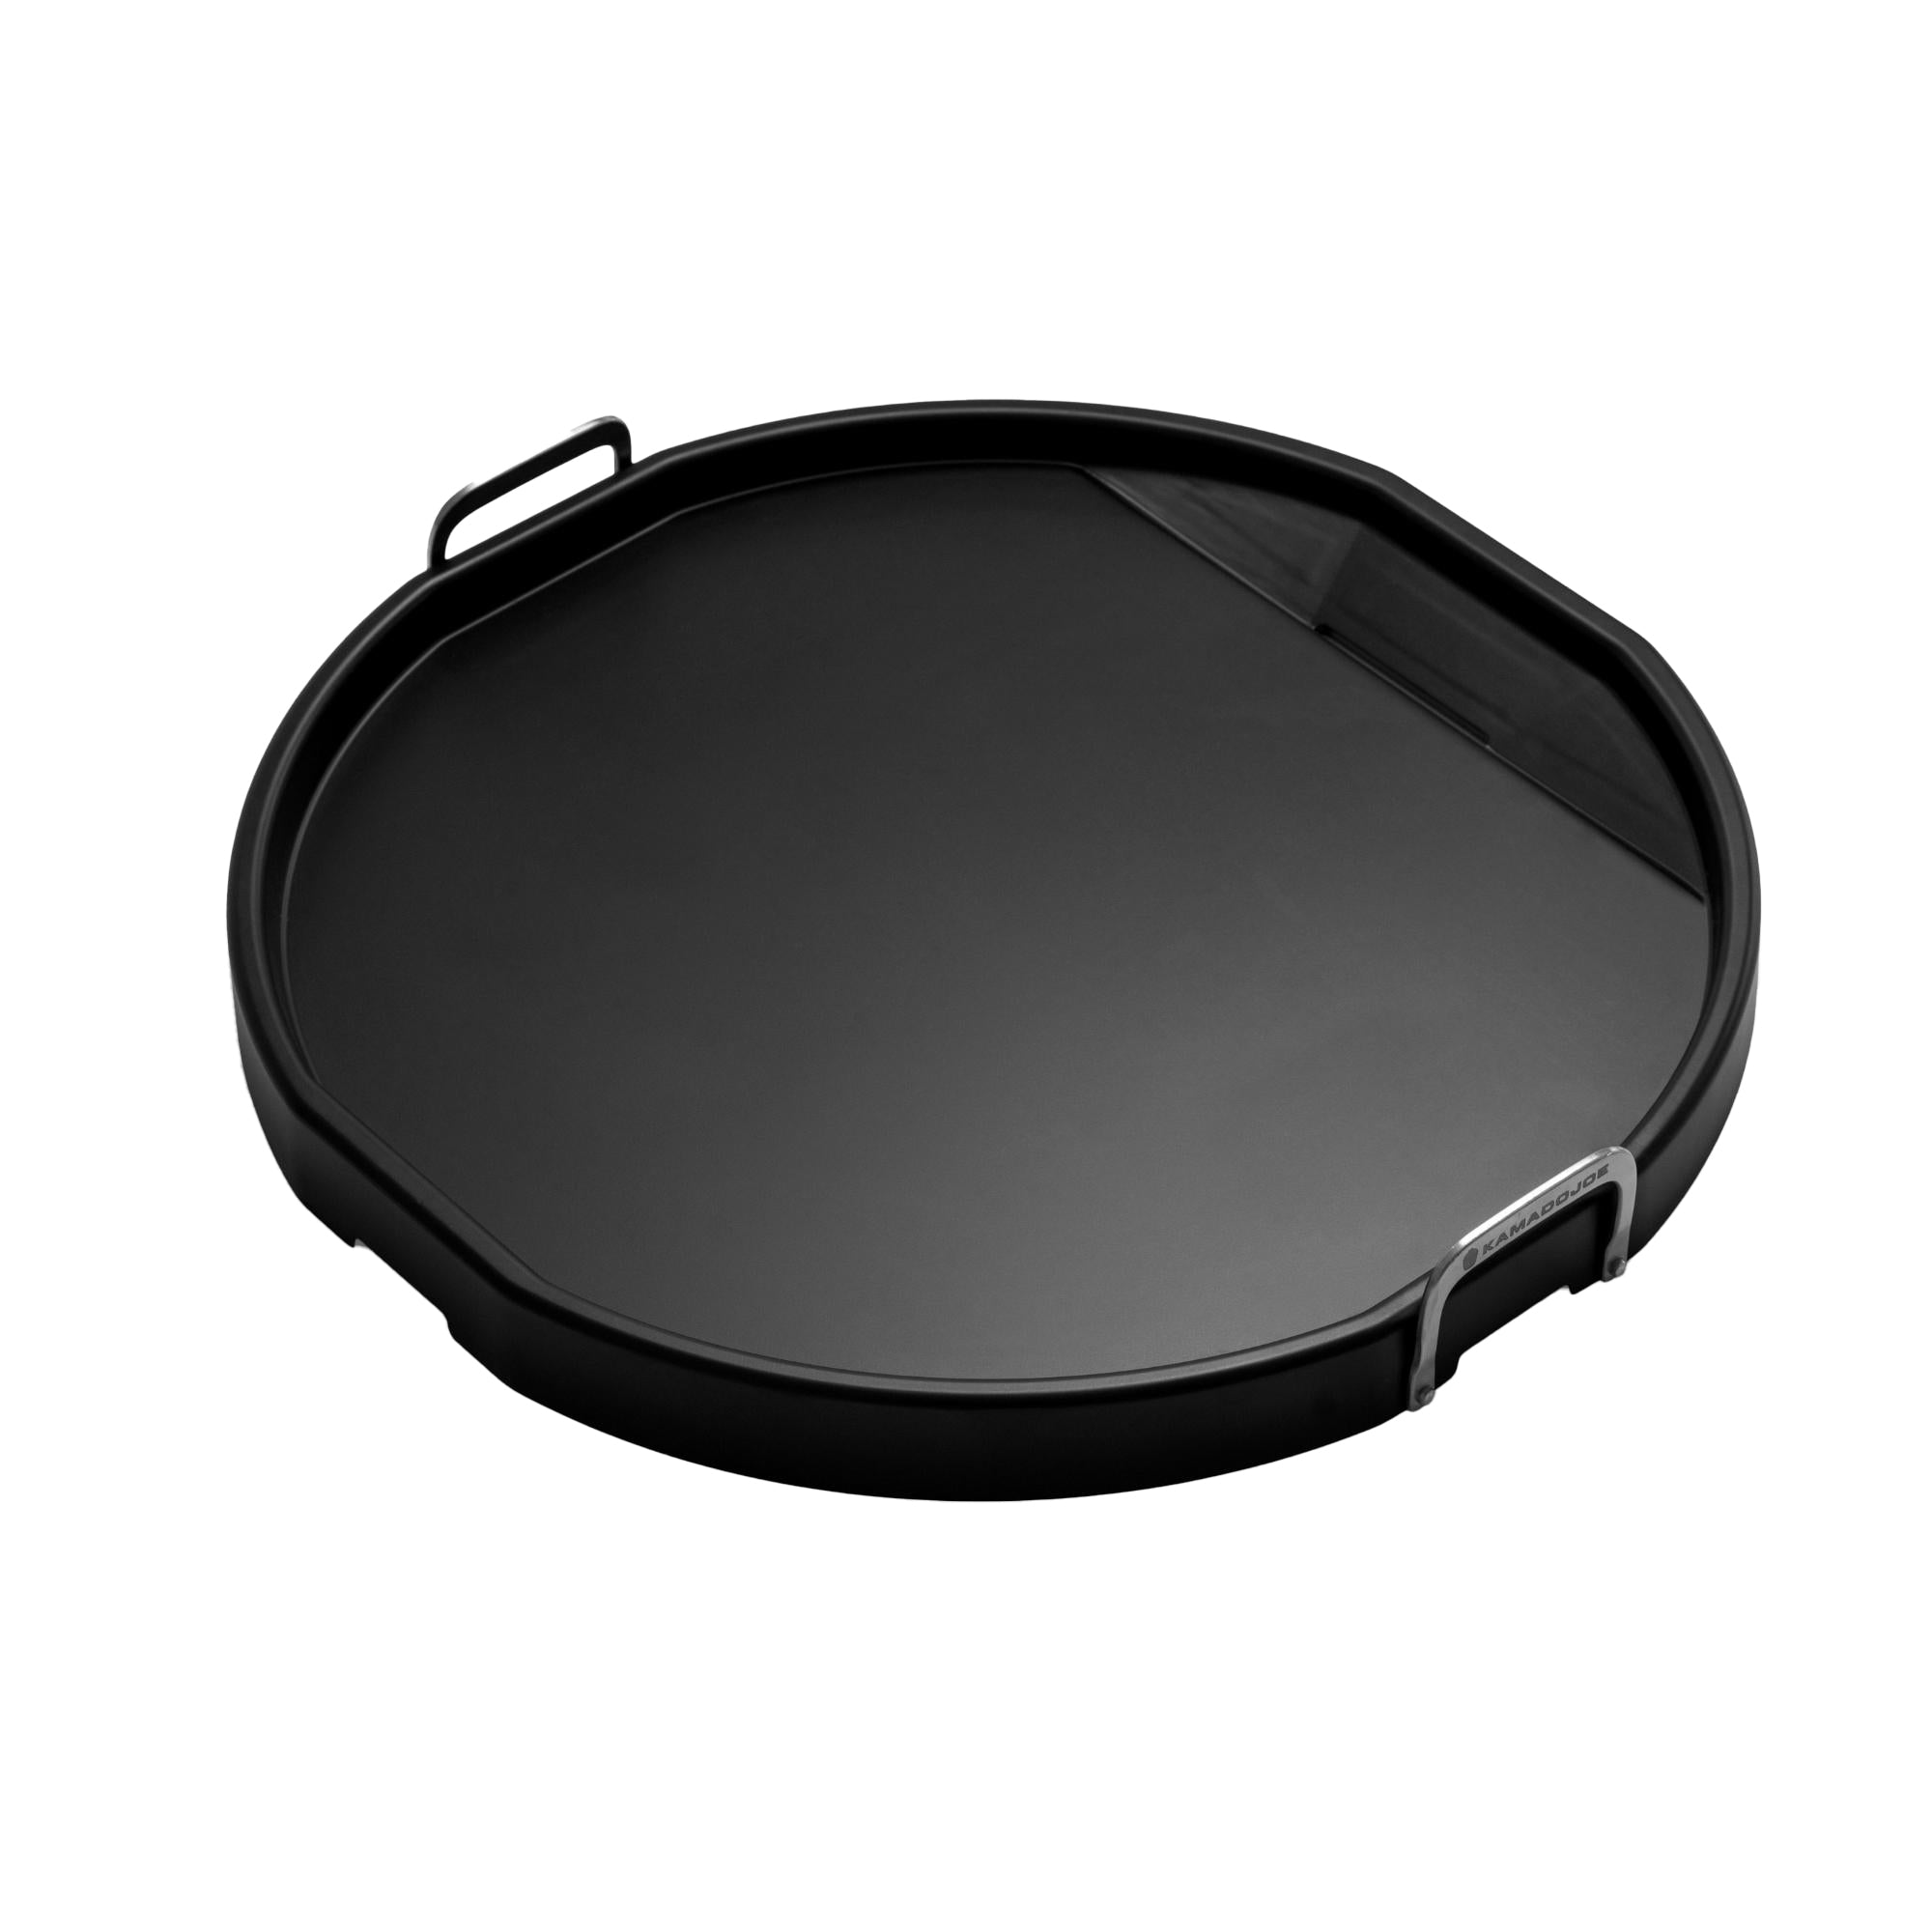 Shallow Round Griddle | Lodge Cast Iron